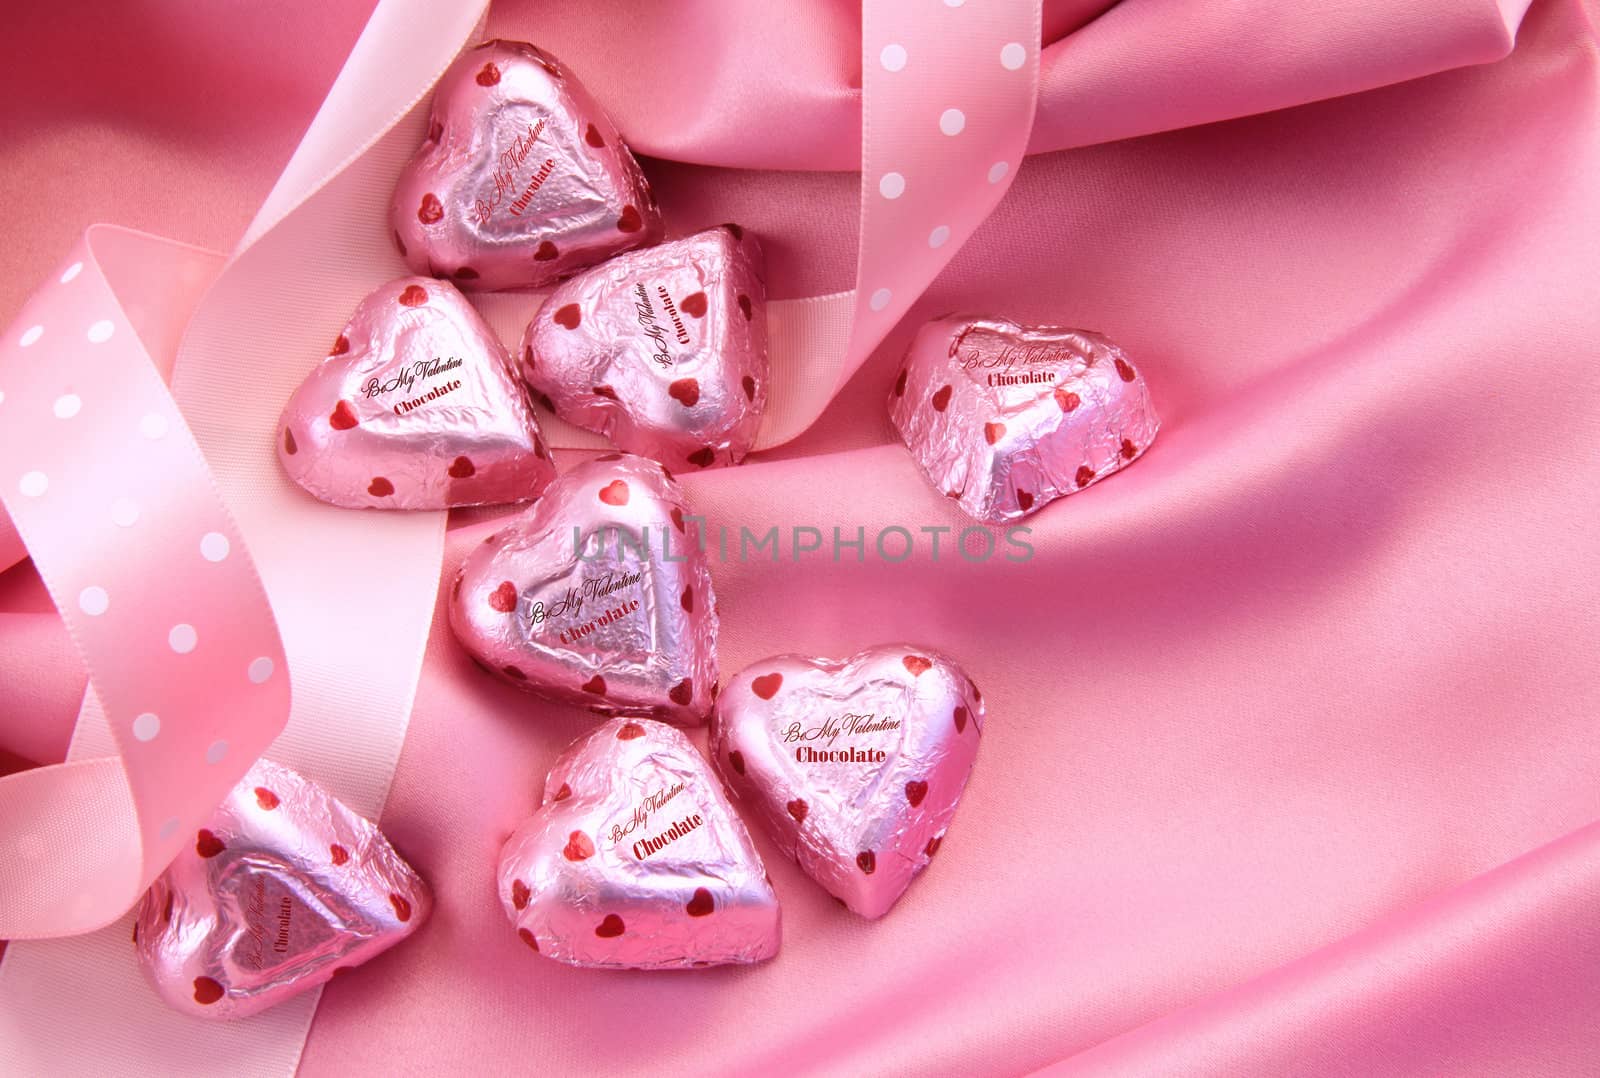 Valentine's chocolate hearts on pink satin by Sandralise